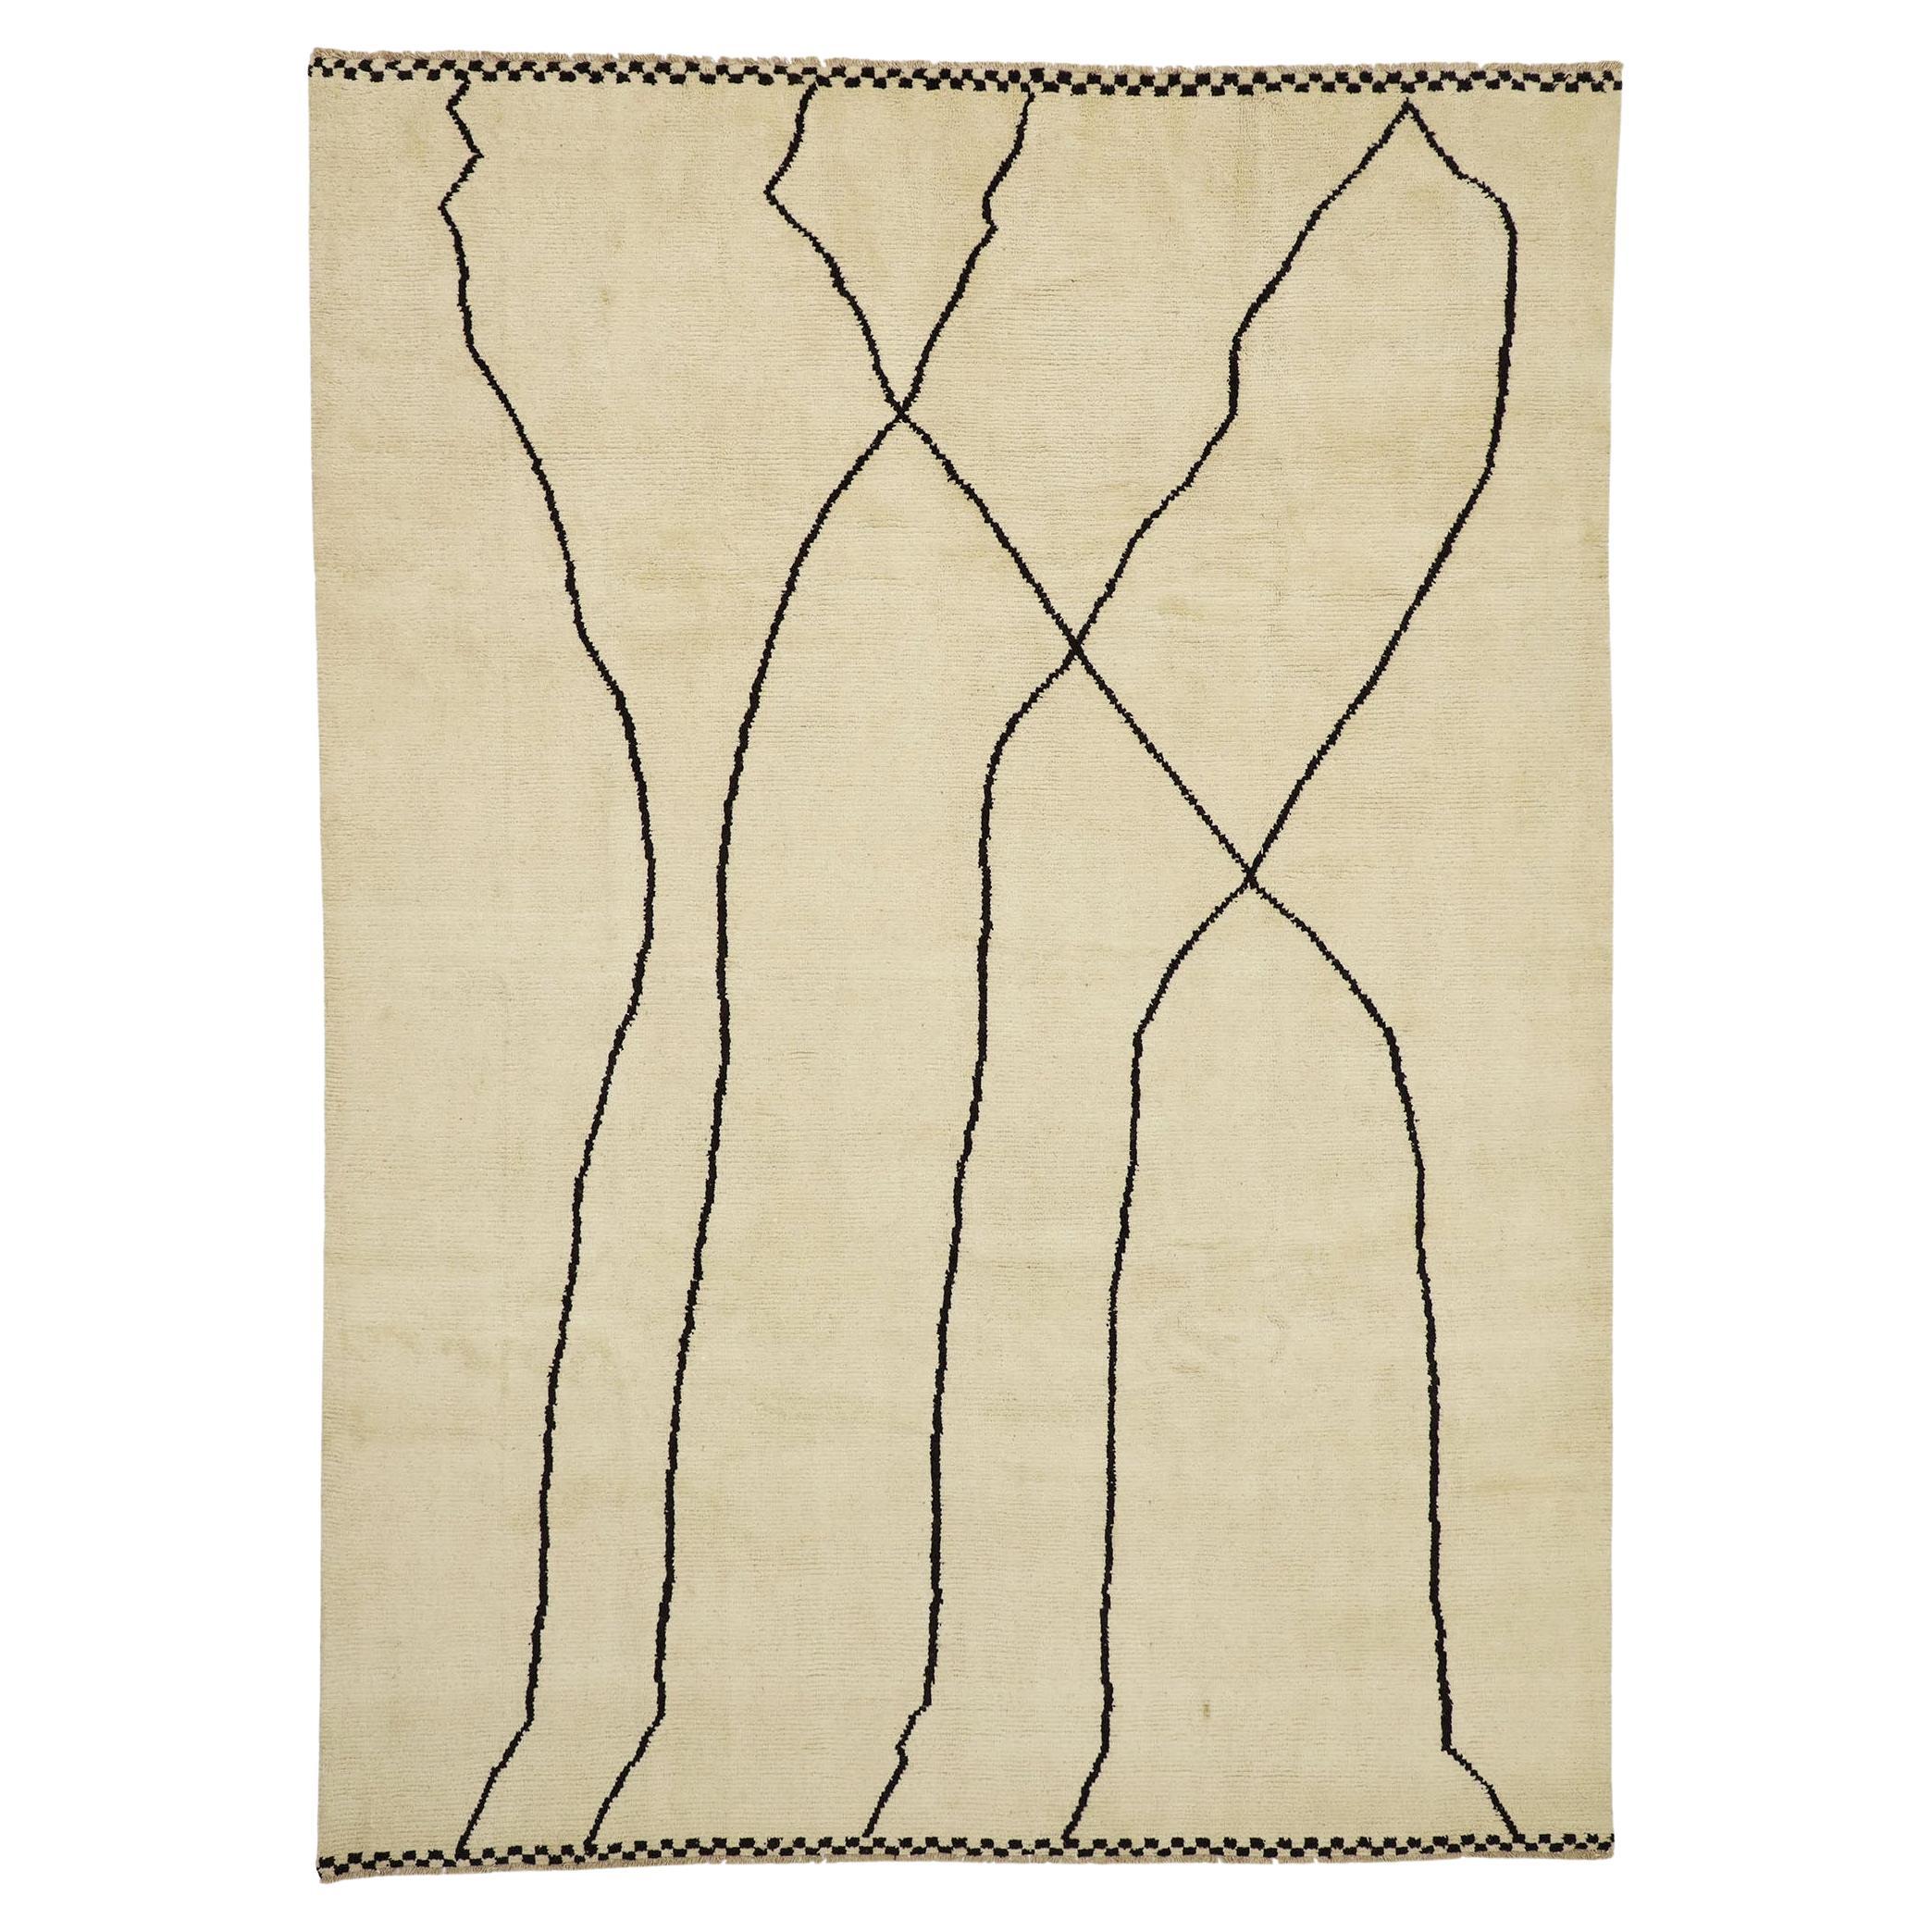 New Contemporary Moroccan Area Rug with Minimalist Style